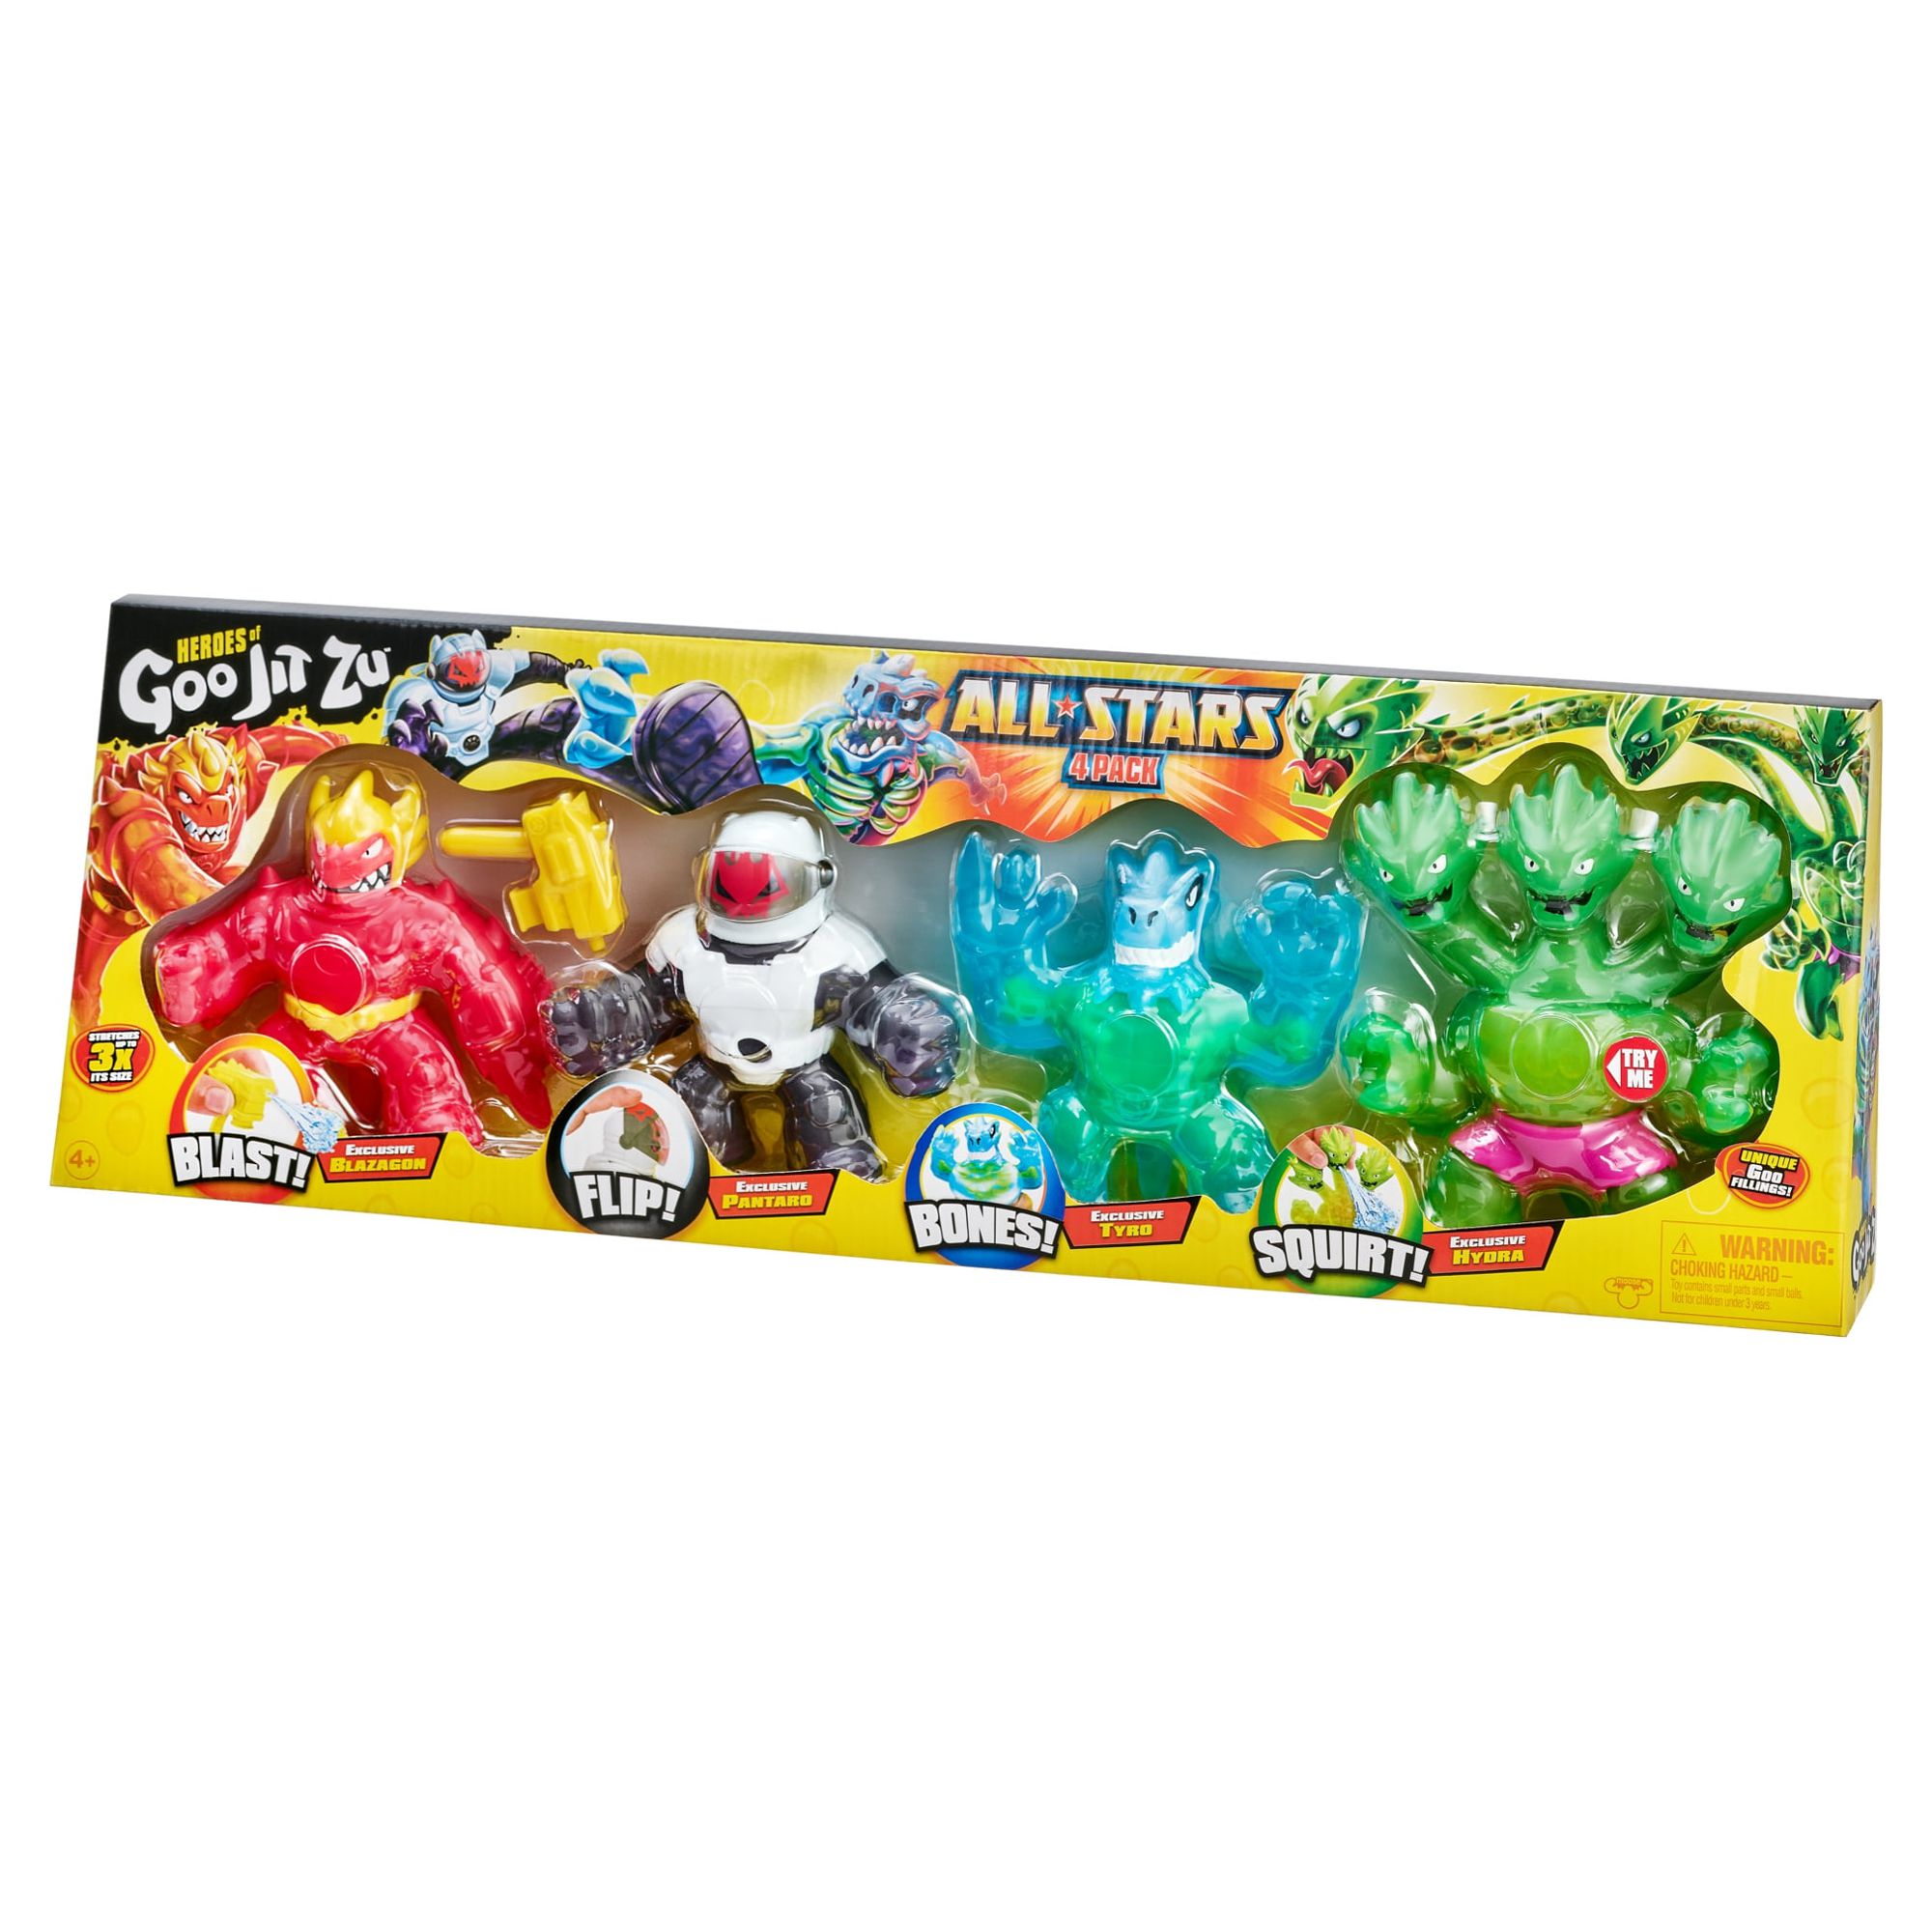 Heroes of Goo Jit Zu, All Stars Pack, 4 Exclusive Action Figures - Pantaro, Blazagon, Tyro and Hydra, 5 inches Tall, Boys, Ages 4+ - image 1 of 7